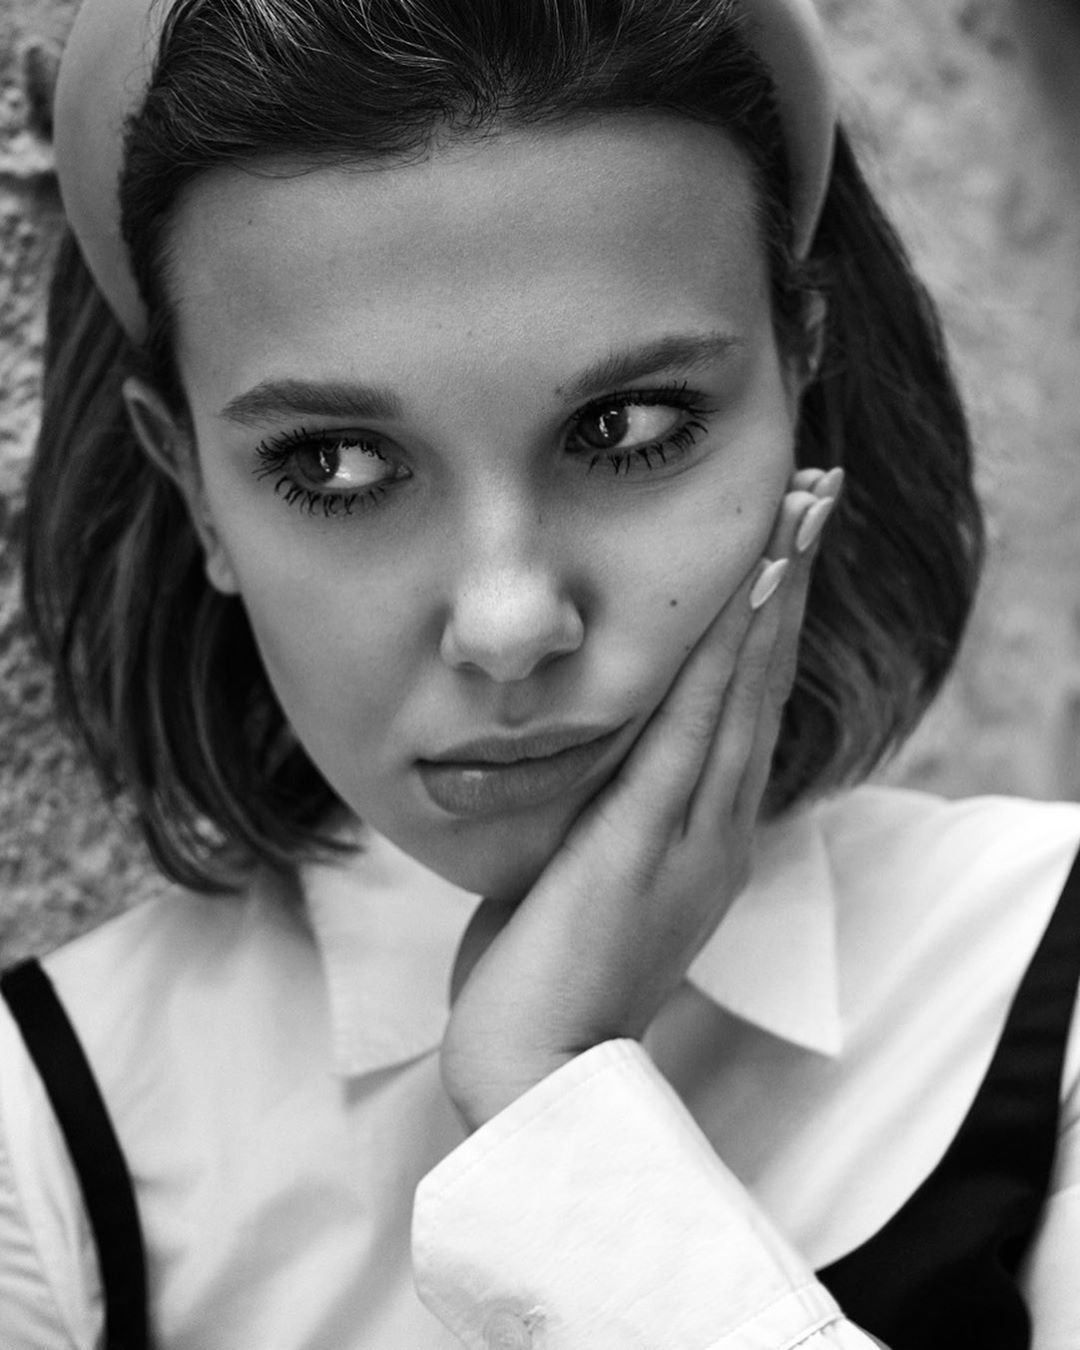 Millie Bobby Brown Photoshoot 2020 Wallpapers - Wallpaper Cave